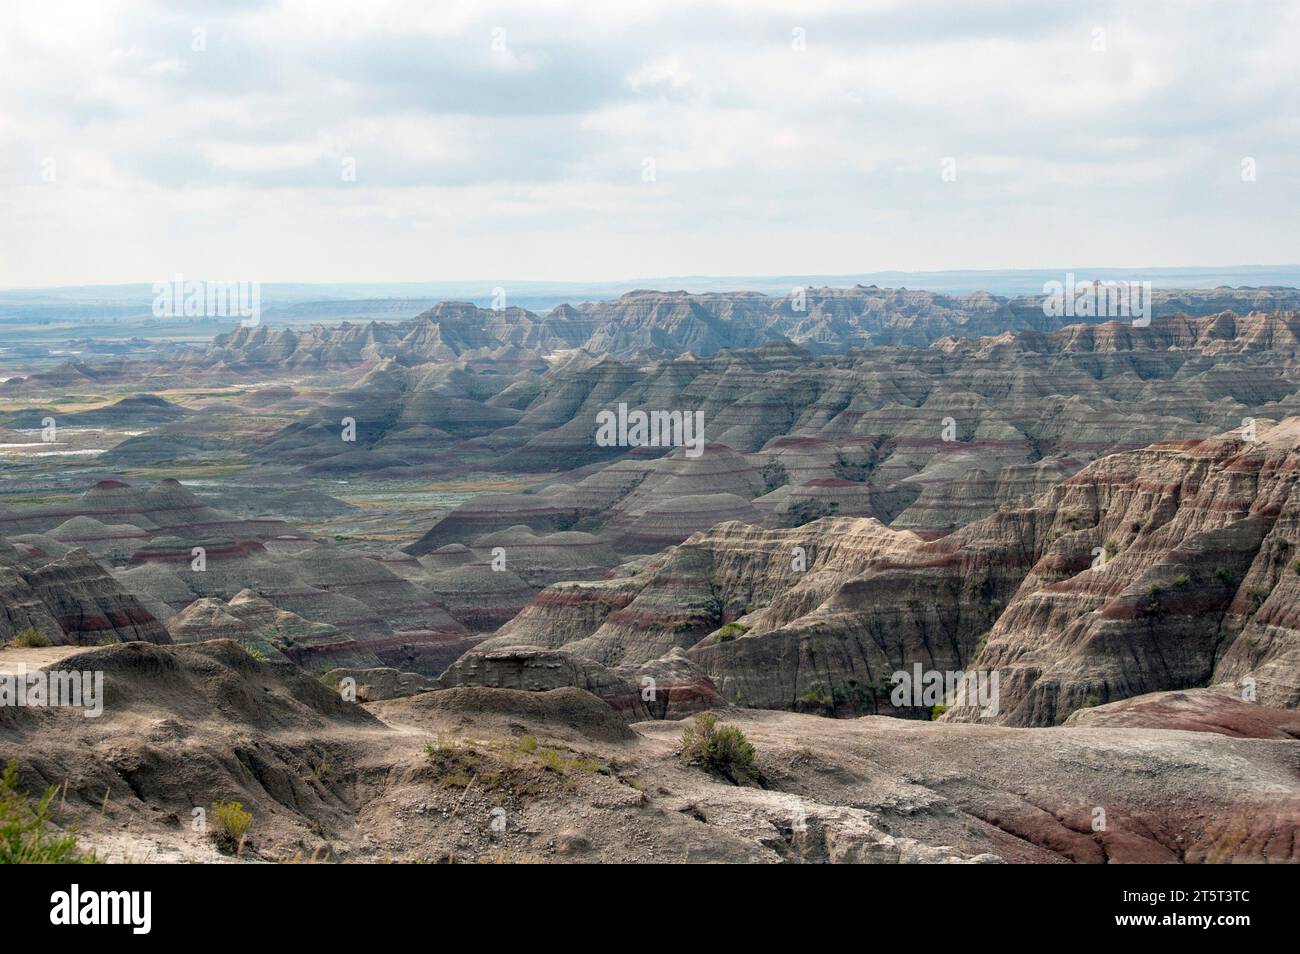 View of the badlands of South Dakota Stock Photo